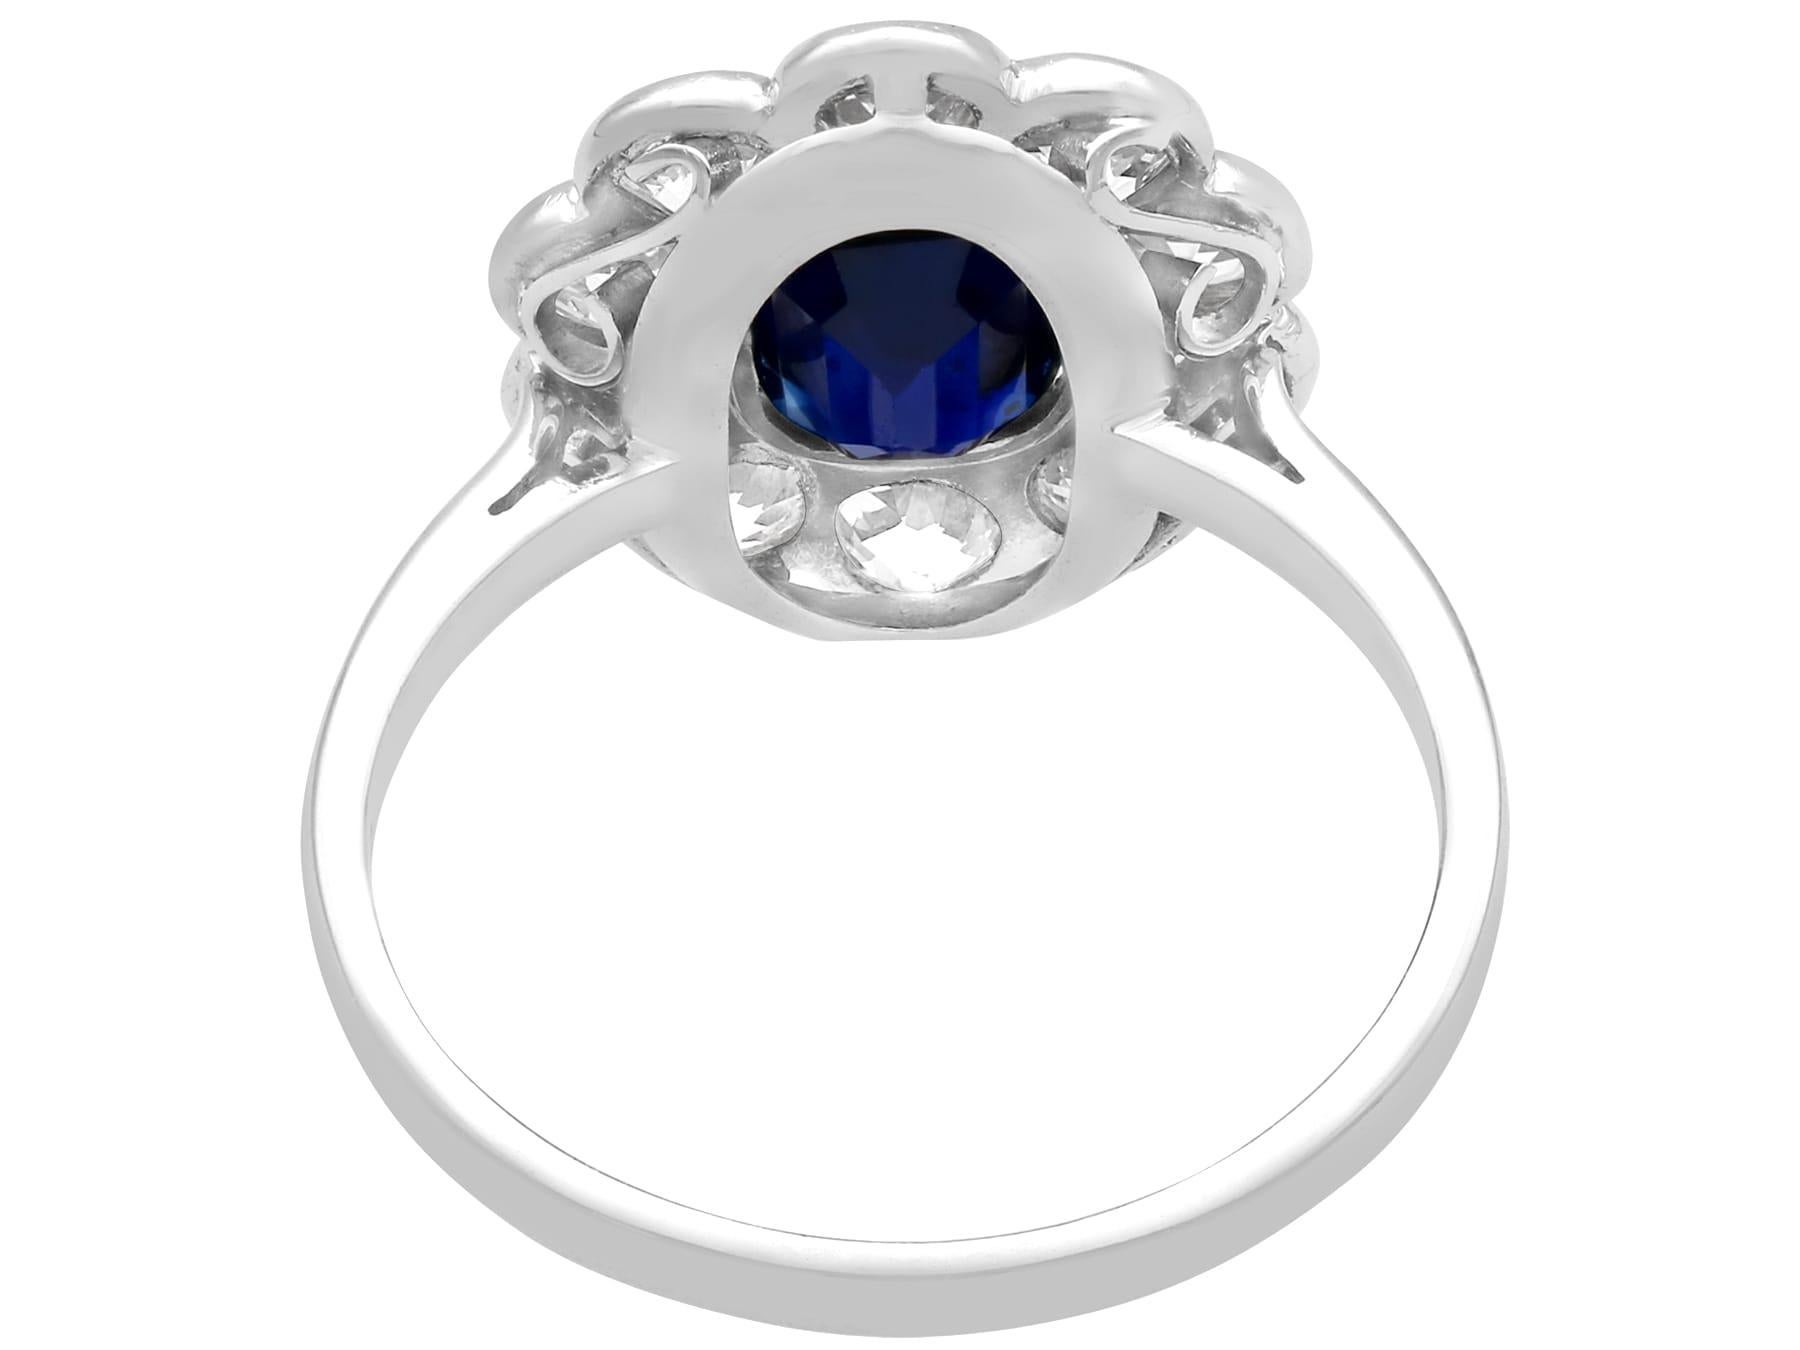 1920s Antique 1.07 Carat Sapphire and 1.54 Carat Diamond Platinum Cluster Ring In Excellent Condition For Sale In Jesmond, Newcastle Upon Tyne